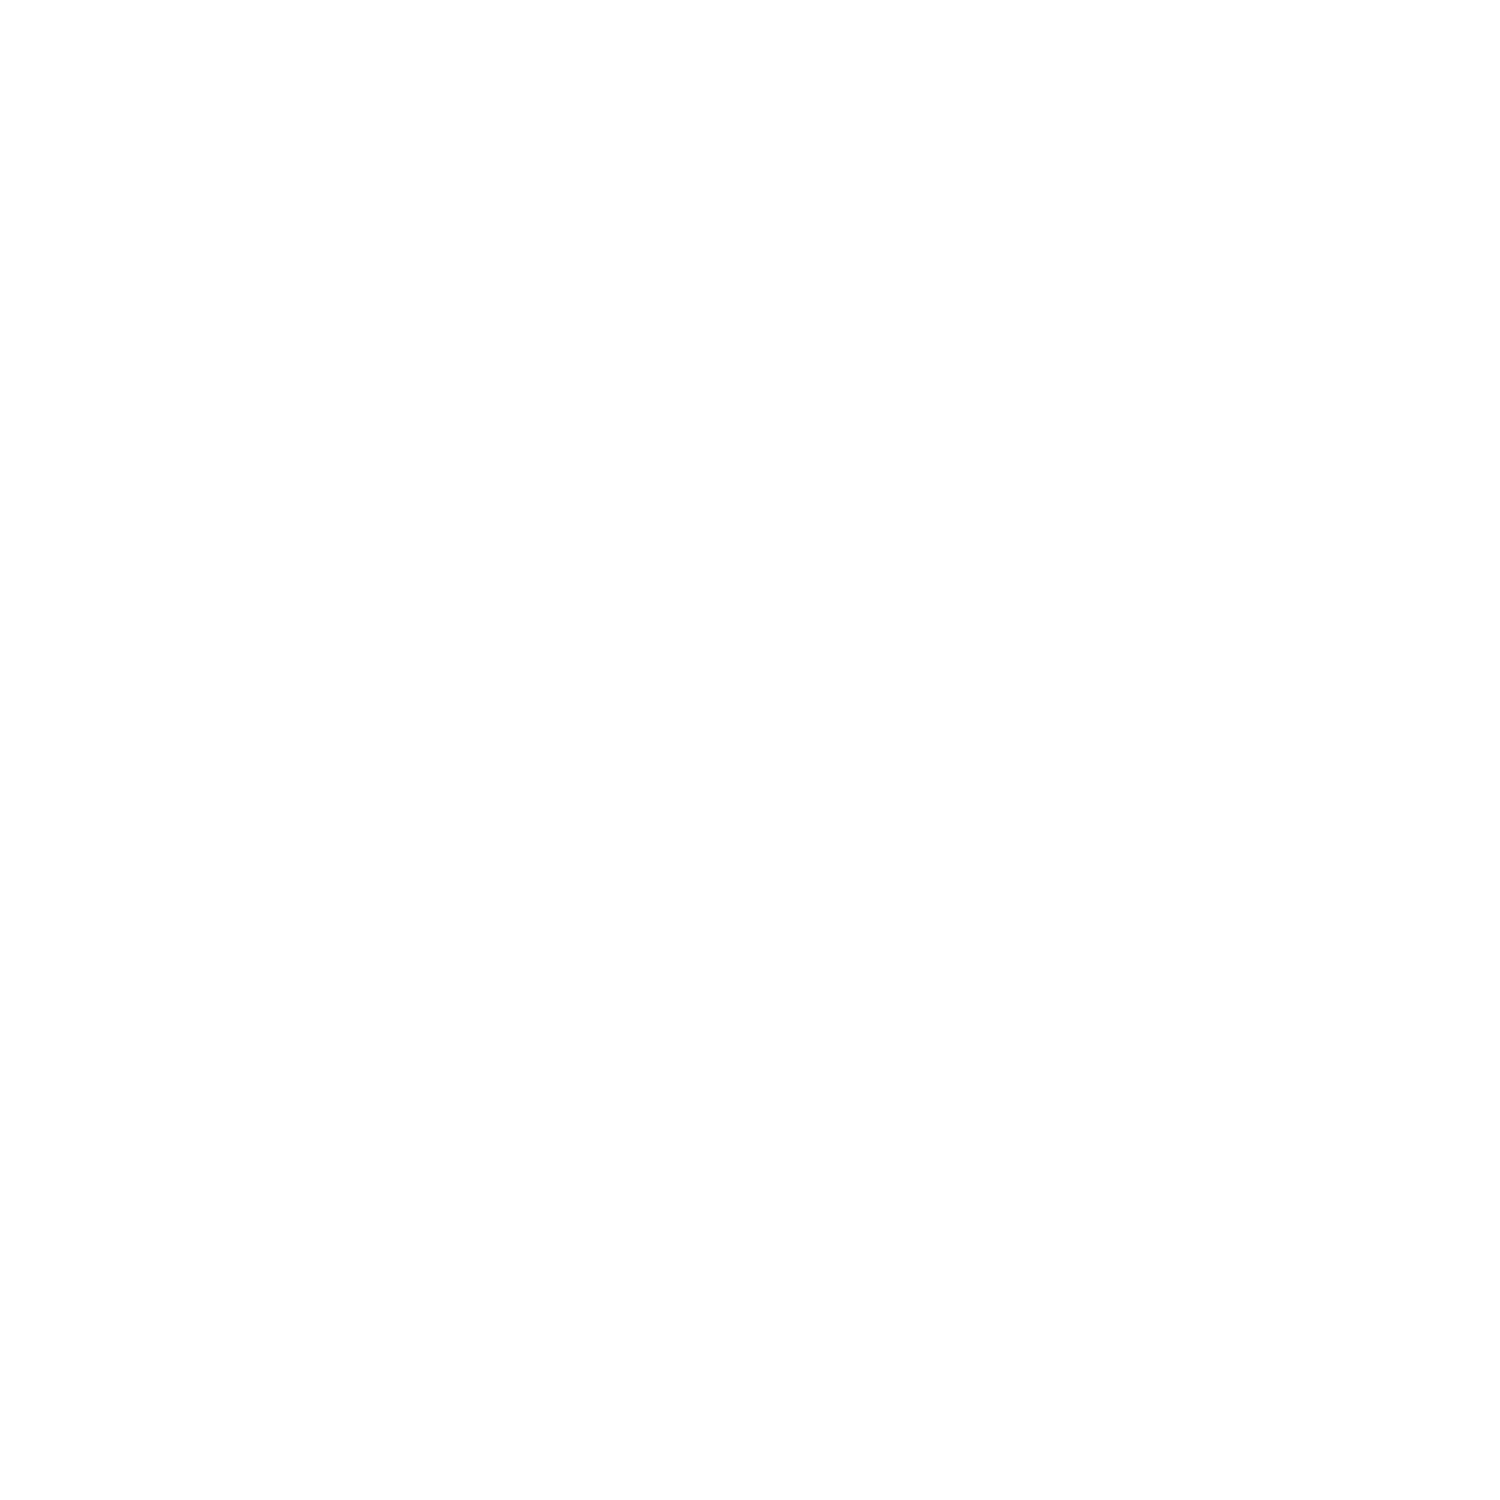 EASTERN ANGLING